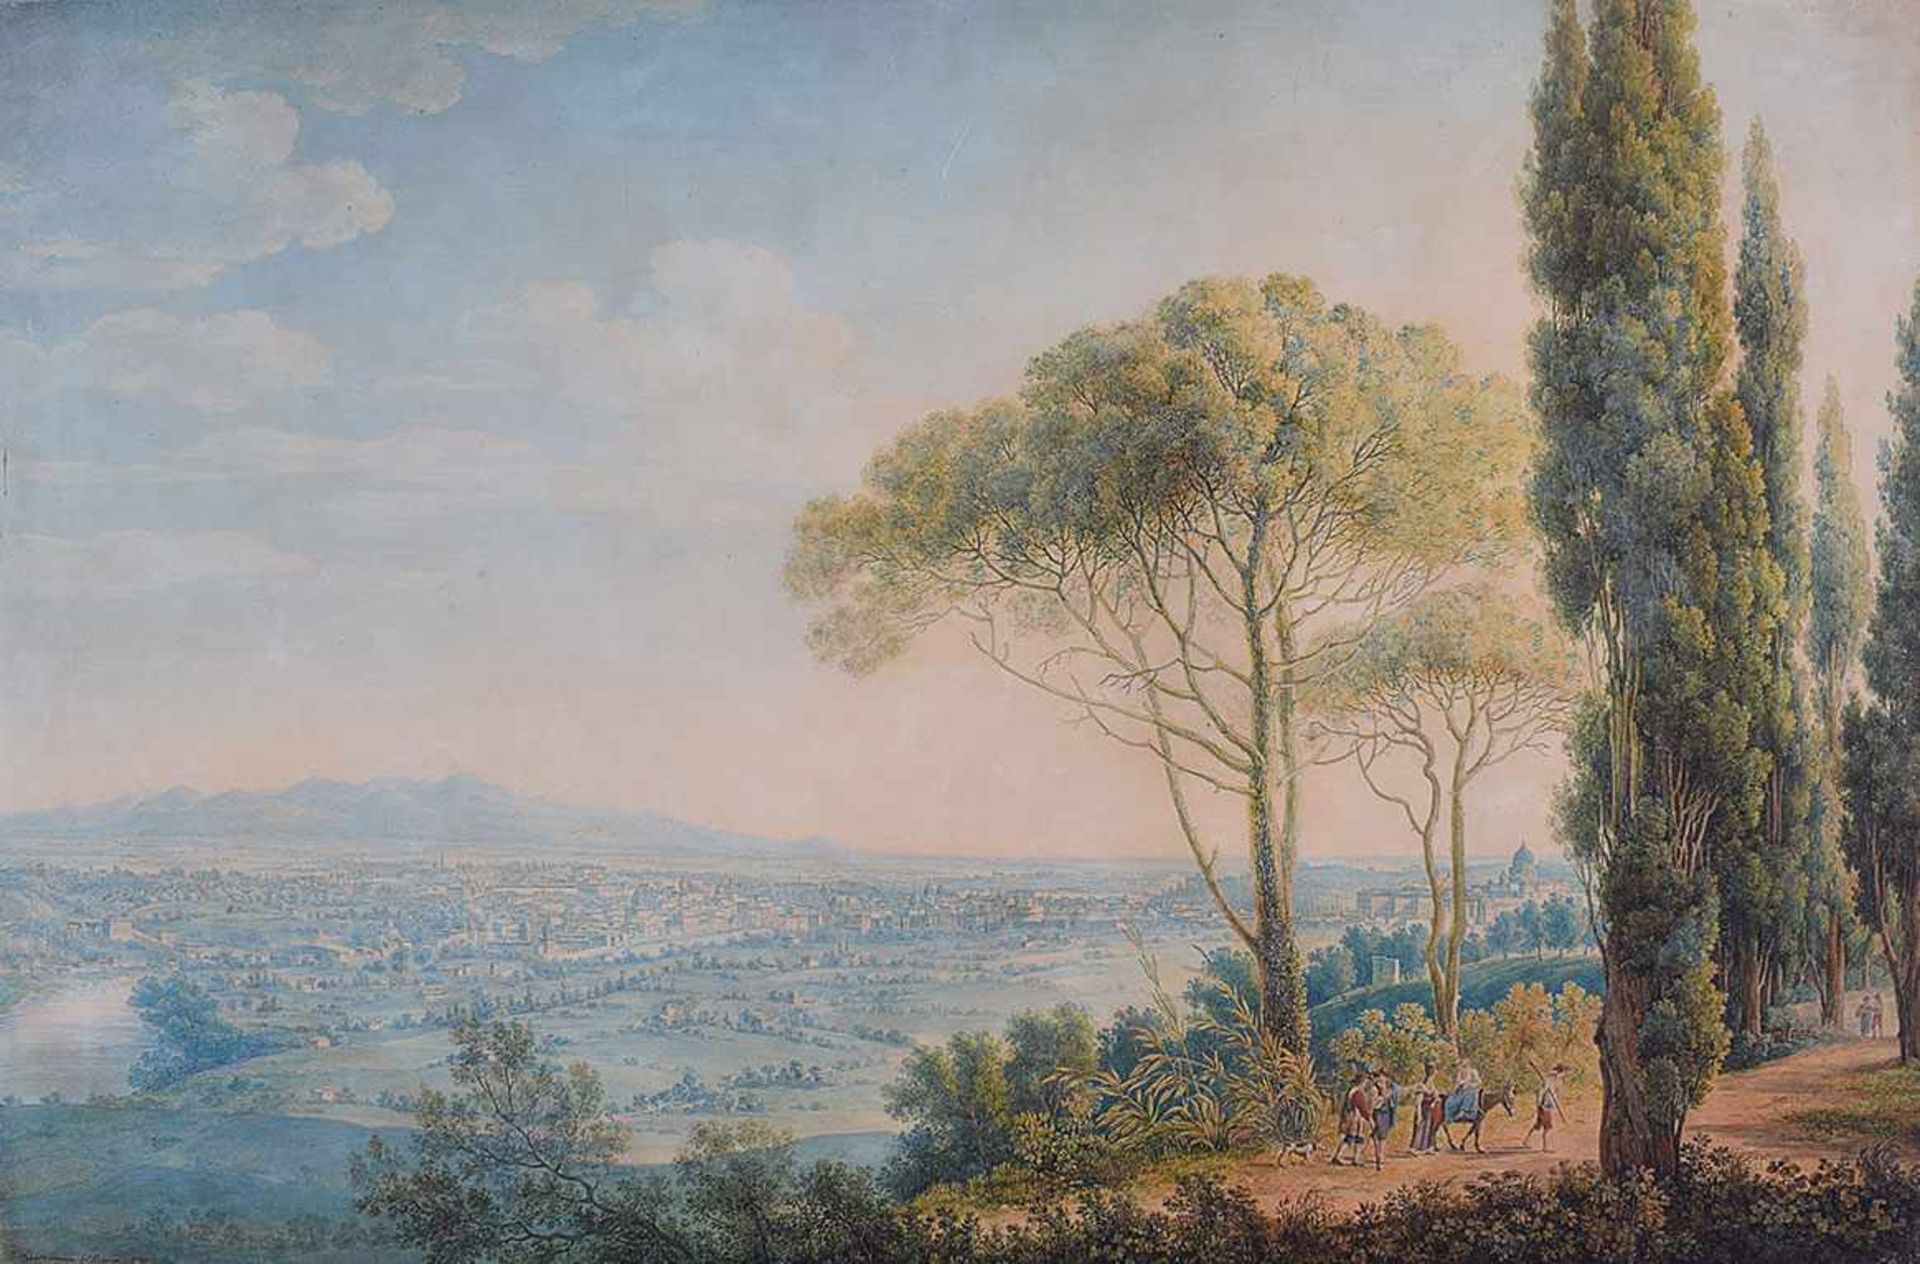 Franz Kaisermann A view of Rome from Monte Mario, 1819 watercolor on paper in one sheet,